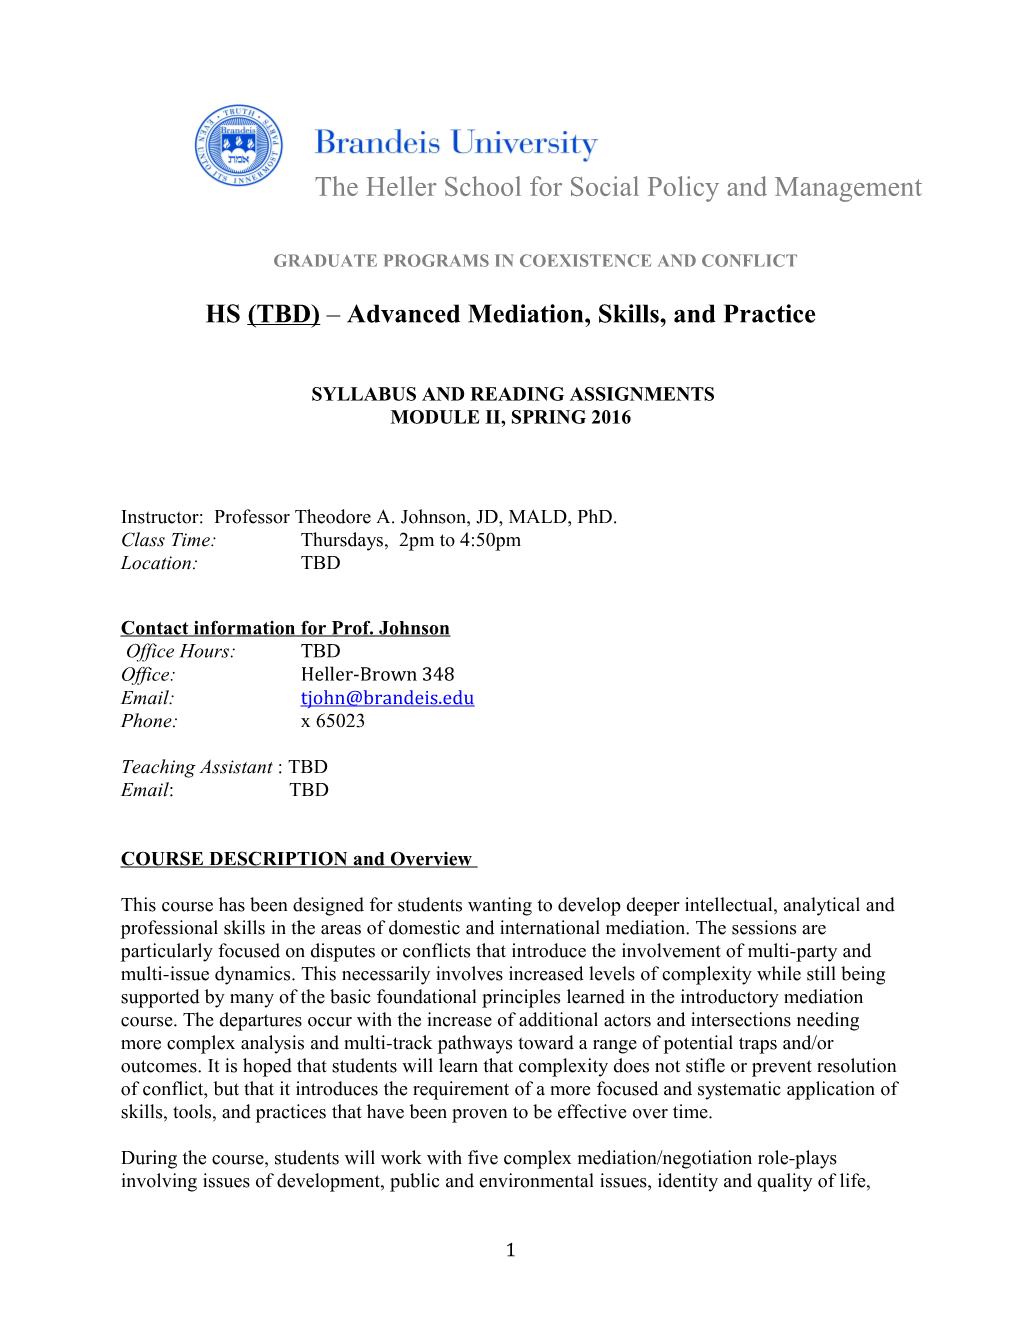 HS (TBD) Advanced Mediation, Skills, and Practice